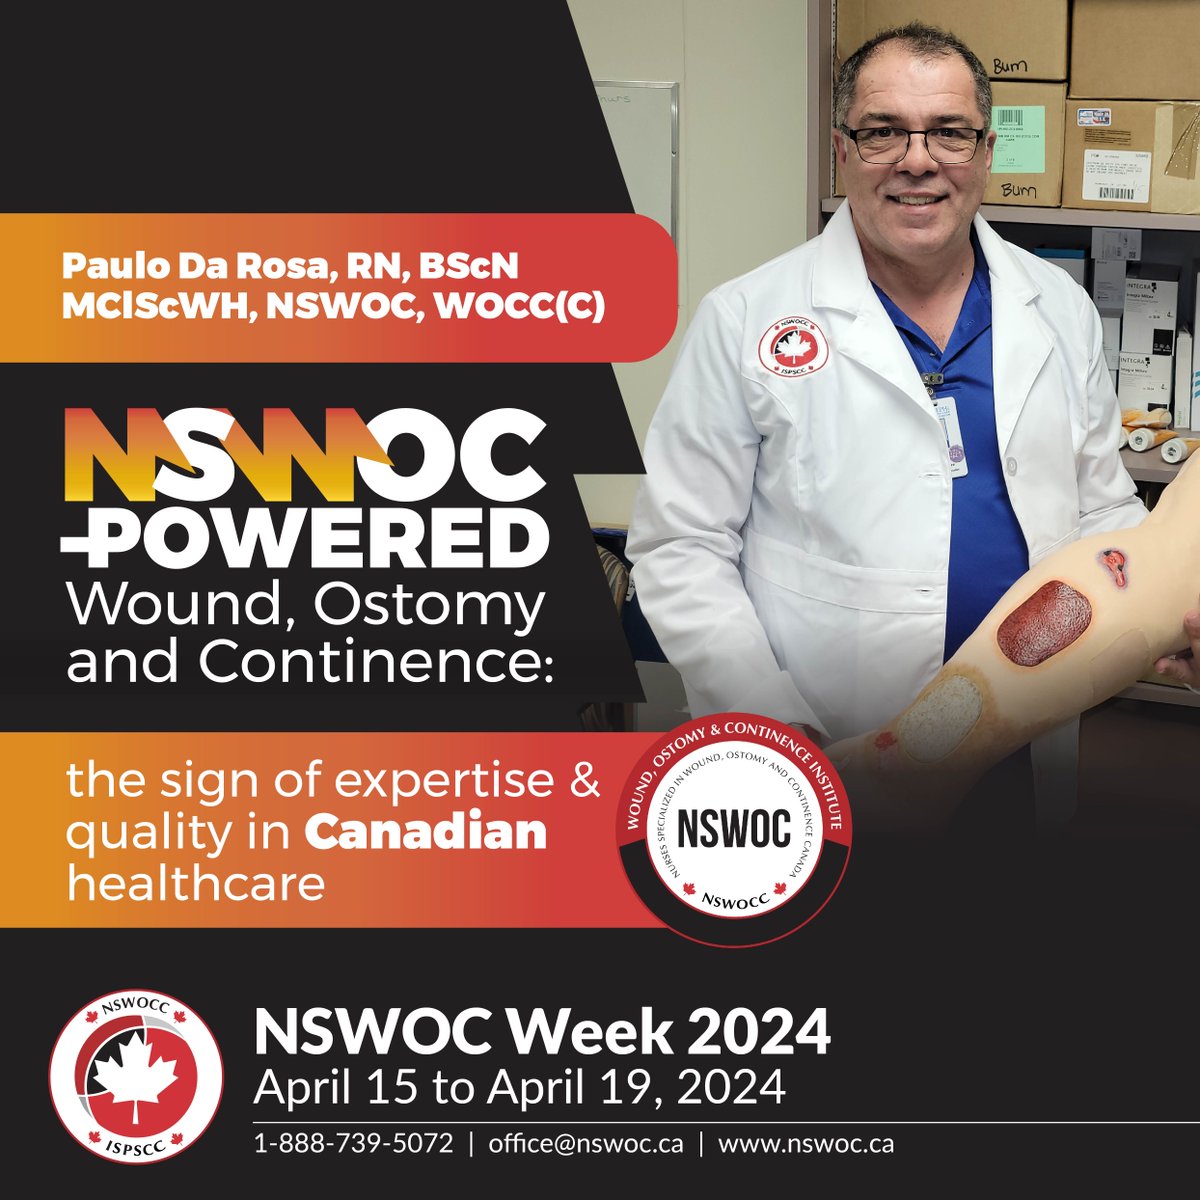 Paulo Da Rosa, RN, BScN MClScWH, NSWOC, WOCC(C) is #NSWOCPowered as he prepares for staff education on lower leg assessment. Show us how you're celebrating #NSWOCs using the hashtag #NSWOCPowered! ------- Read more about NSWOC Week at nswoc.ca/post/nswoc-wee…